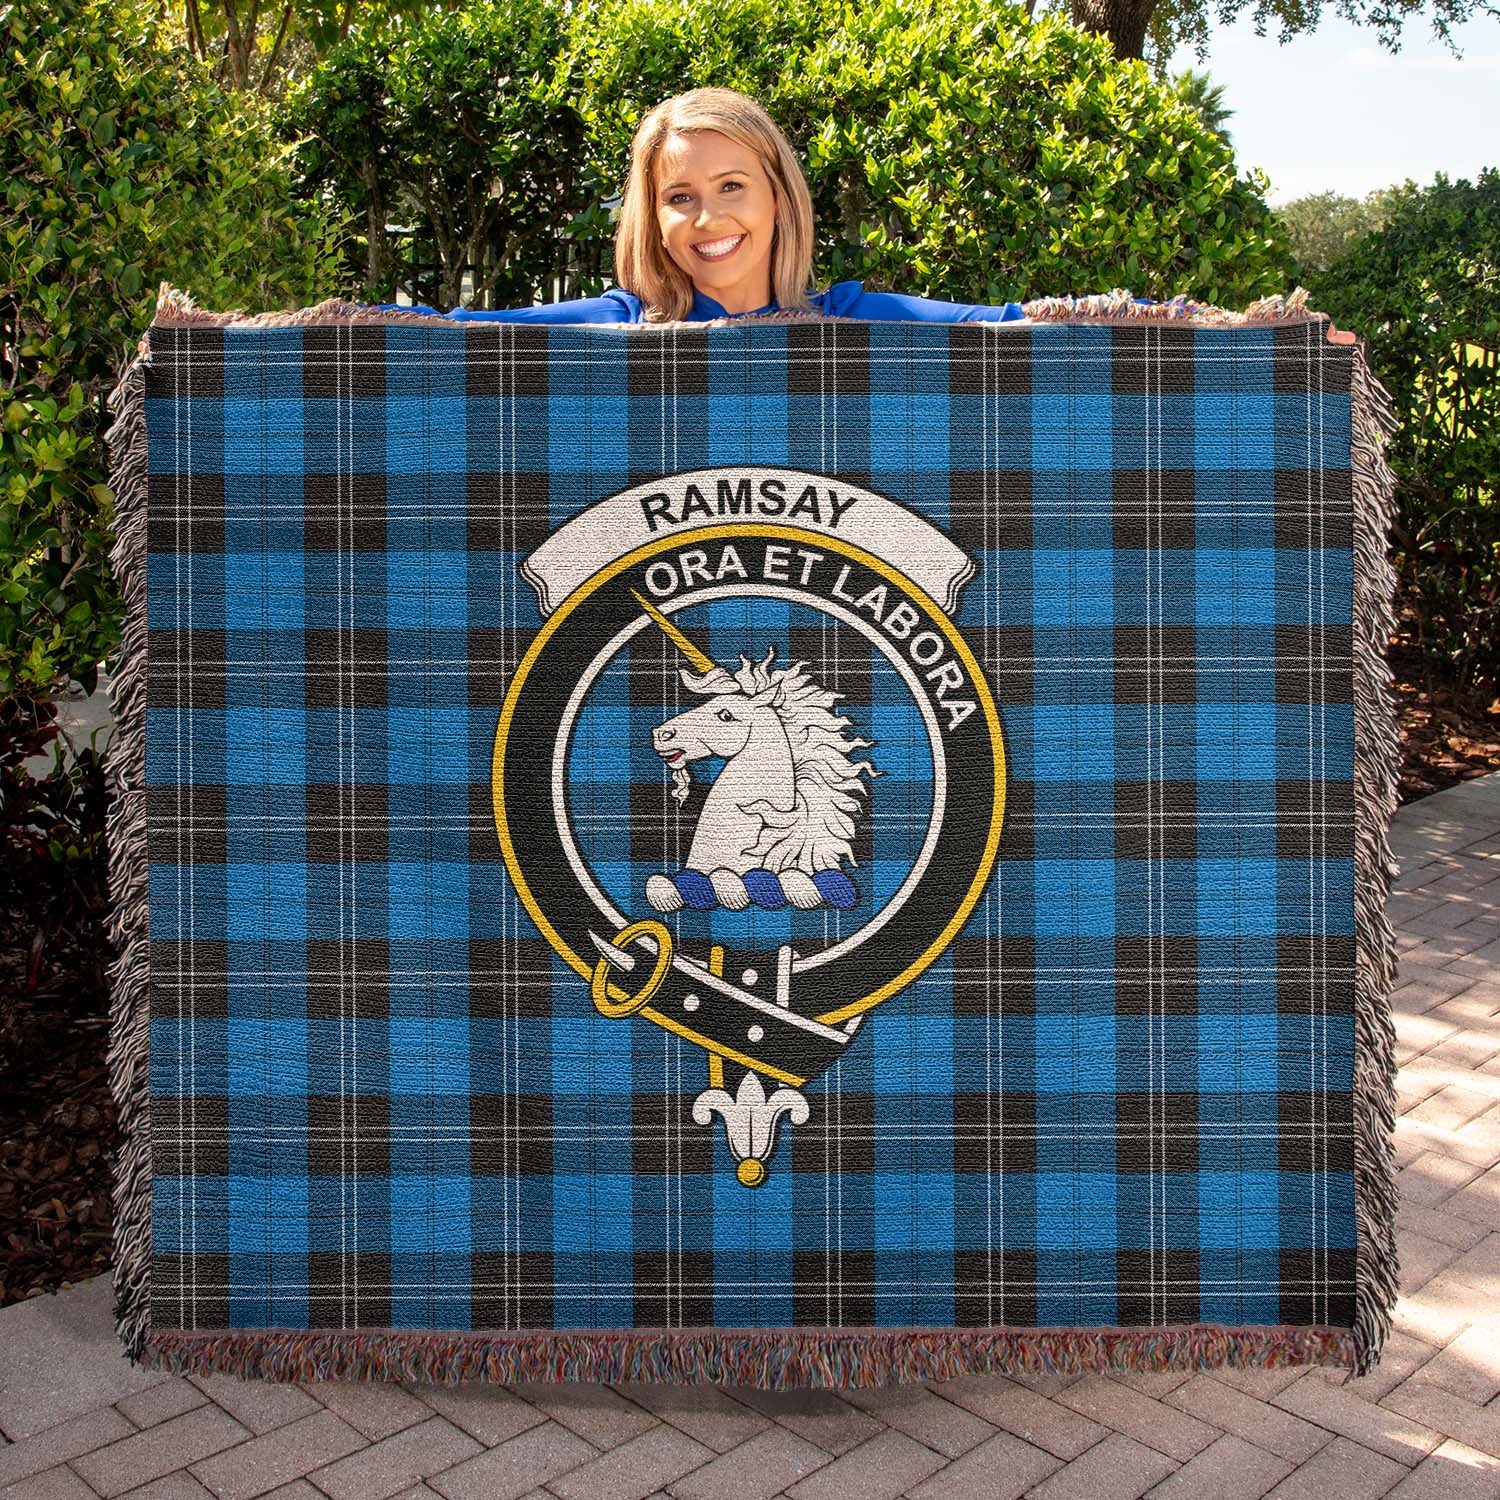 Tartan Vibes Clothing Ramsay Blue Ancient Tartan Woven Blanket with Family Crest